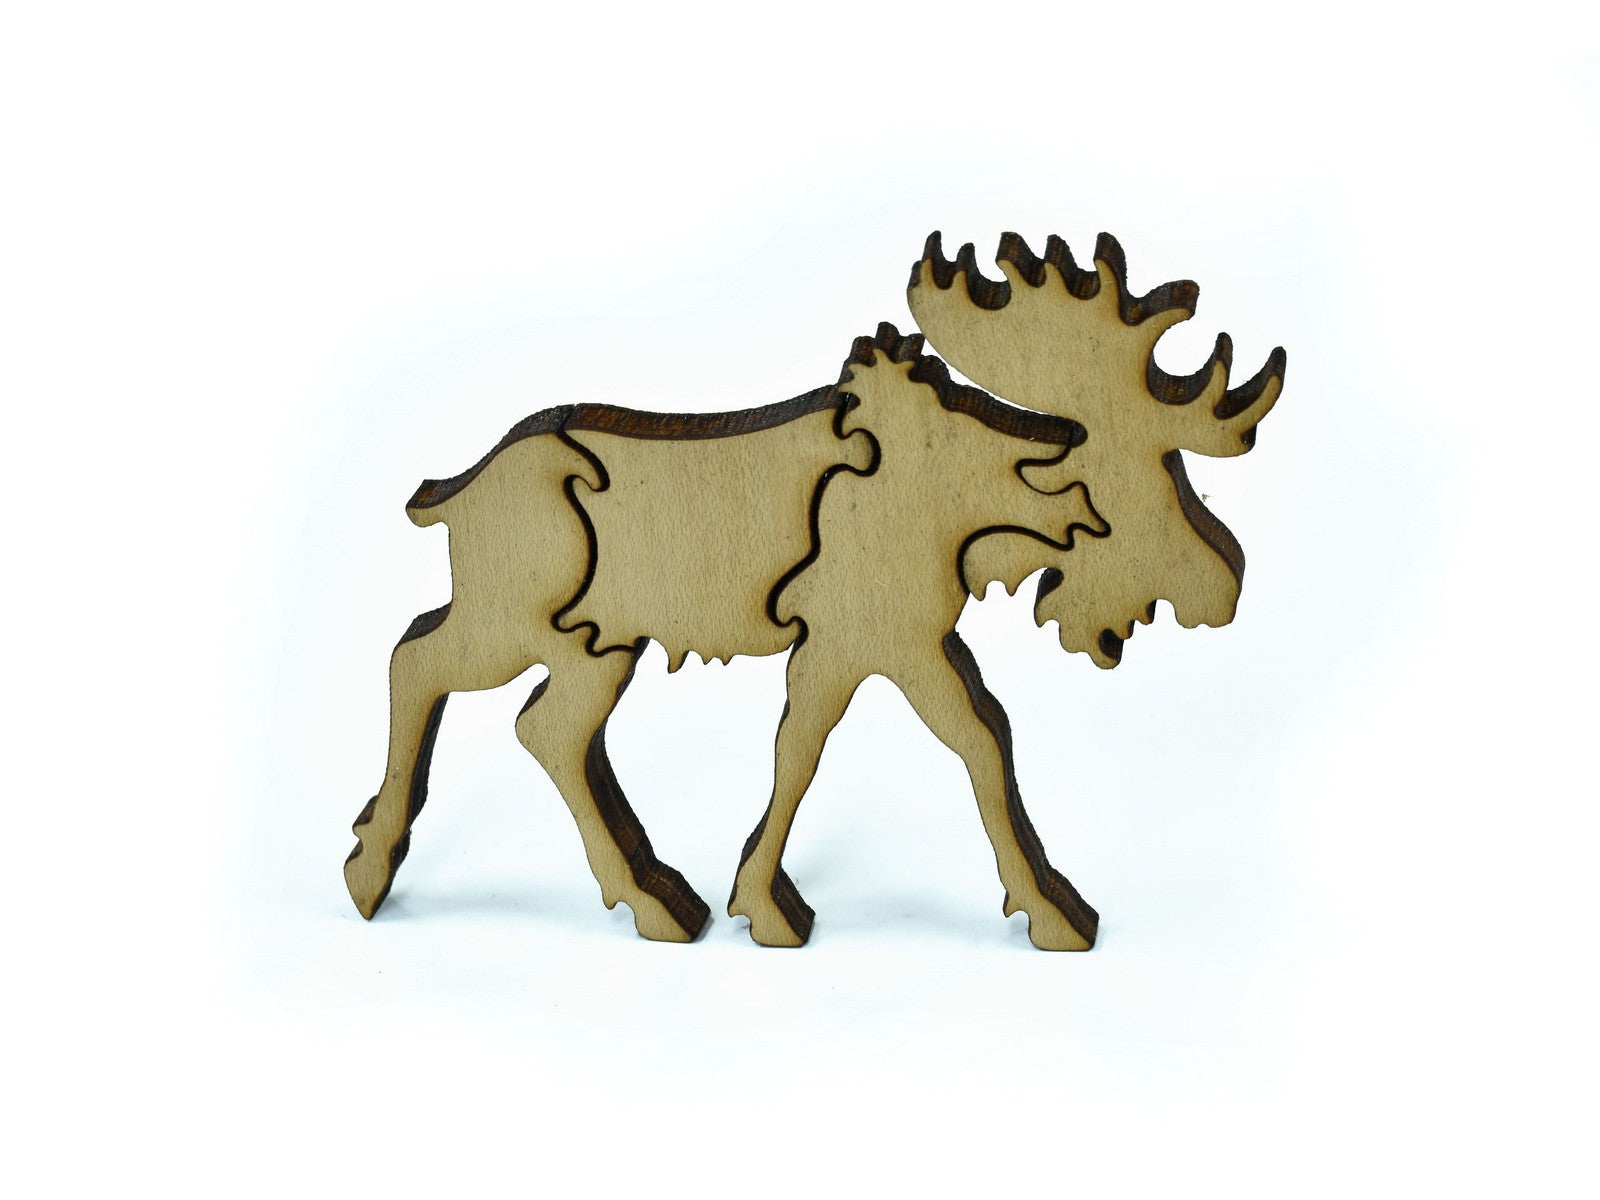 A closeup of pieces in the shape of a moose.